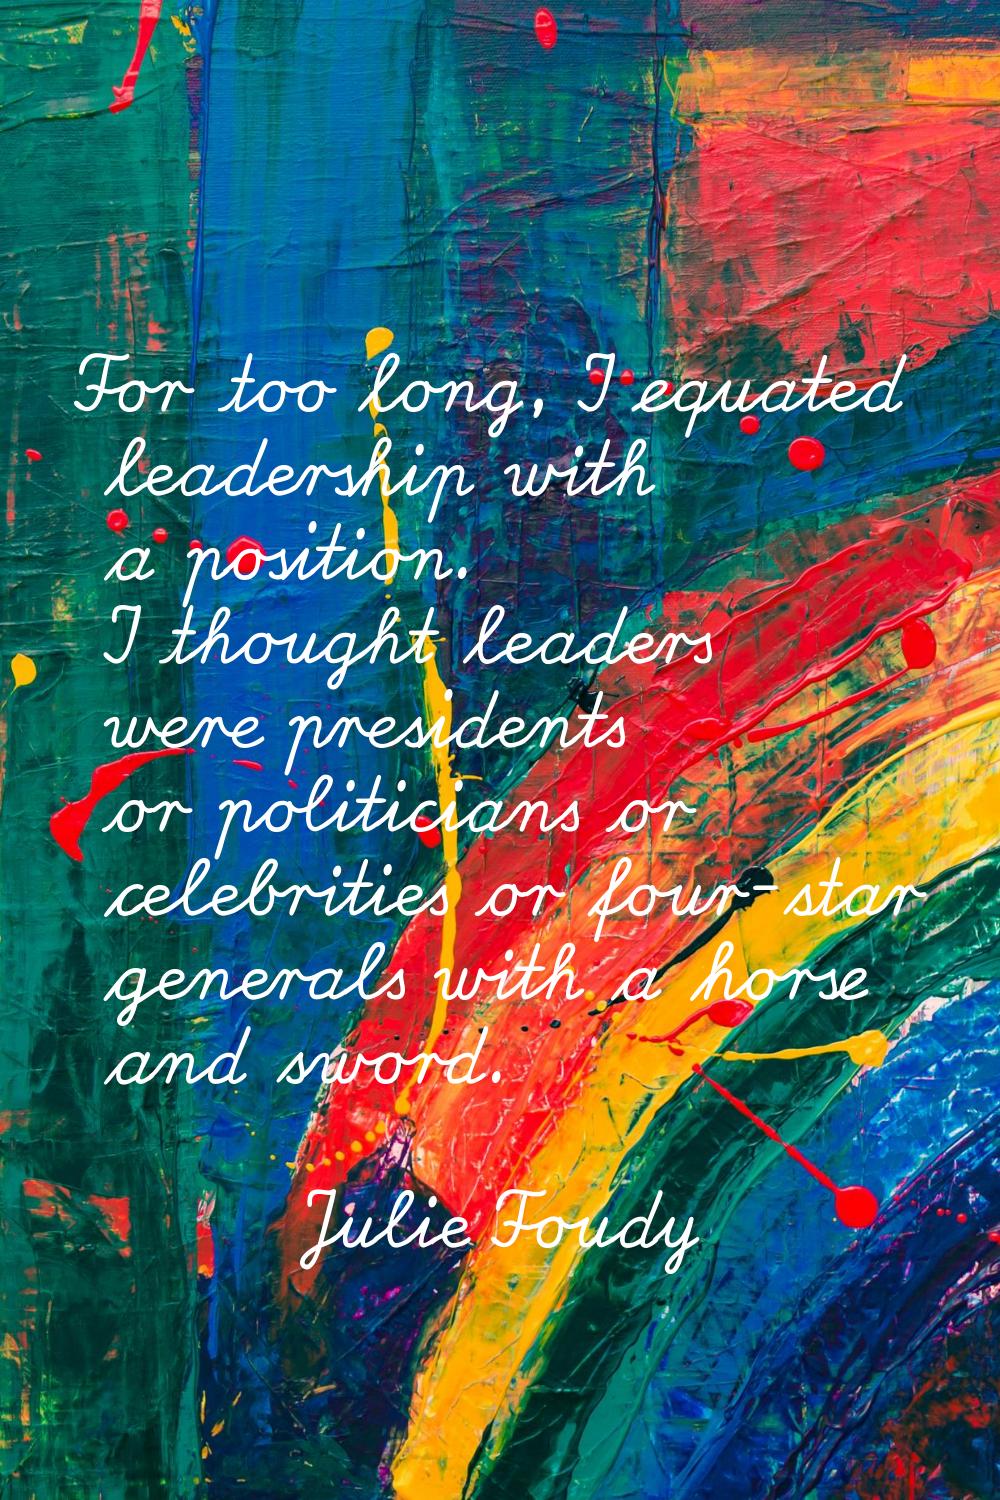 For too long, I equated leadership with a position. I thought leaders were presidents or politician